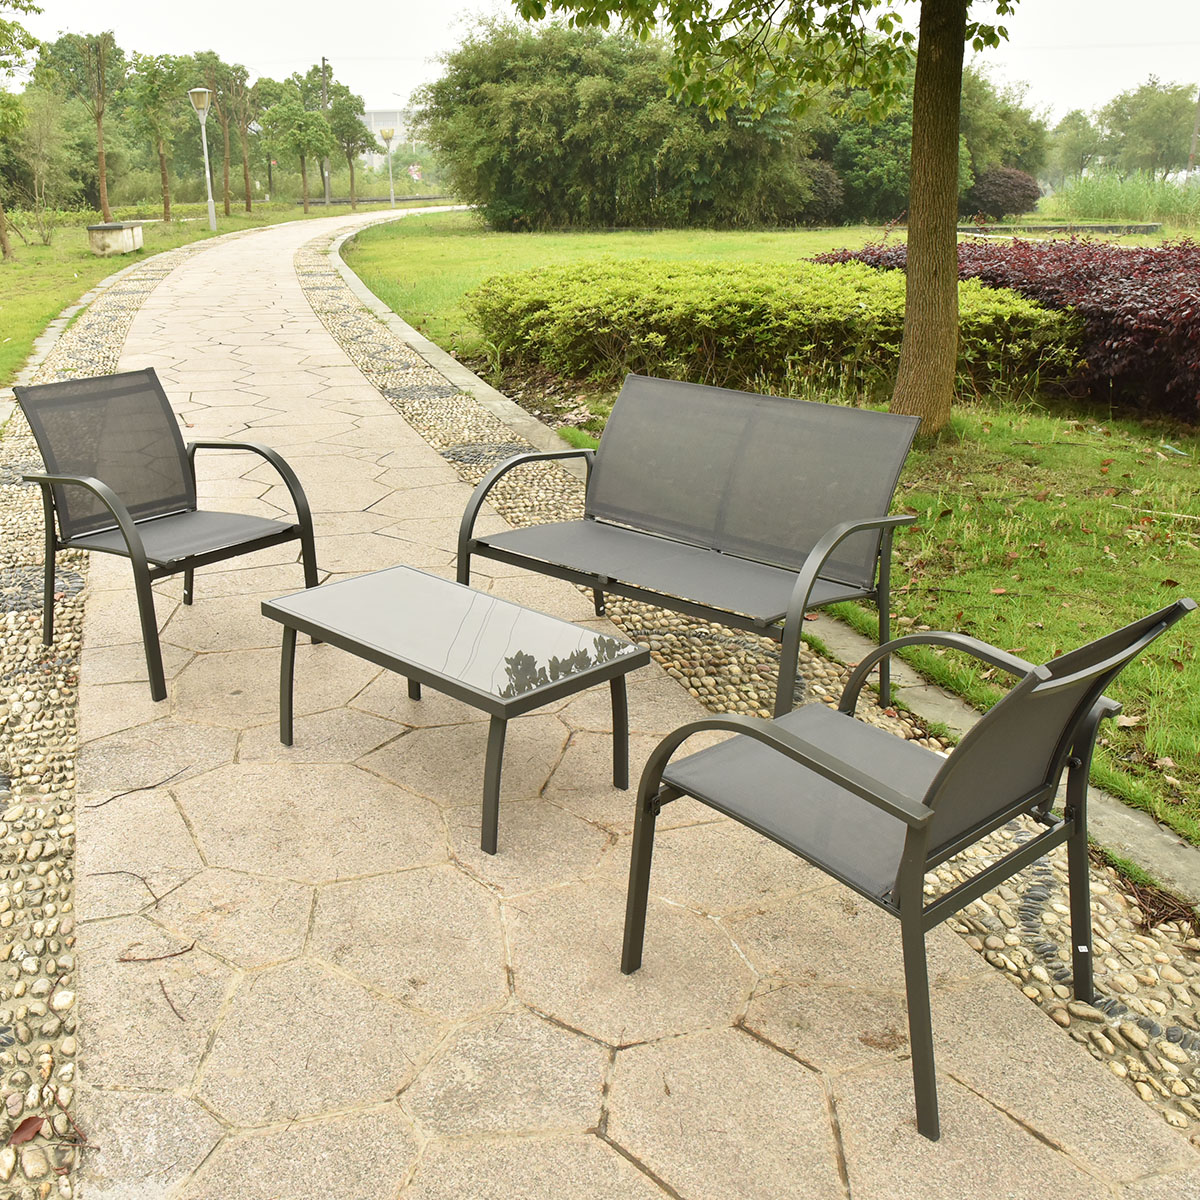 outdoor patio furniture sets costway 4pcs patio garden furniture set steel frame outdoor lawn sofa chairs WIVQPZM